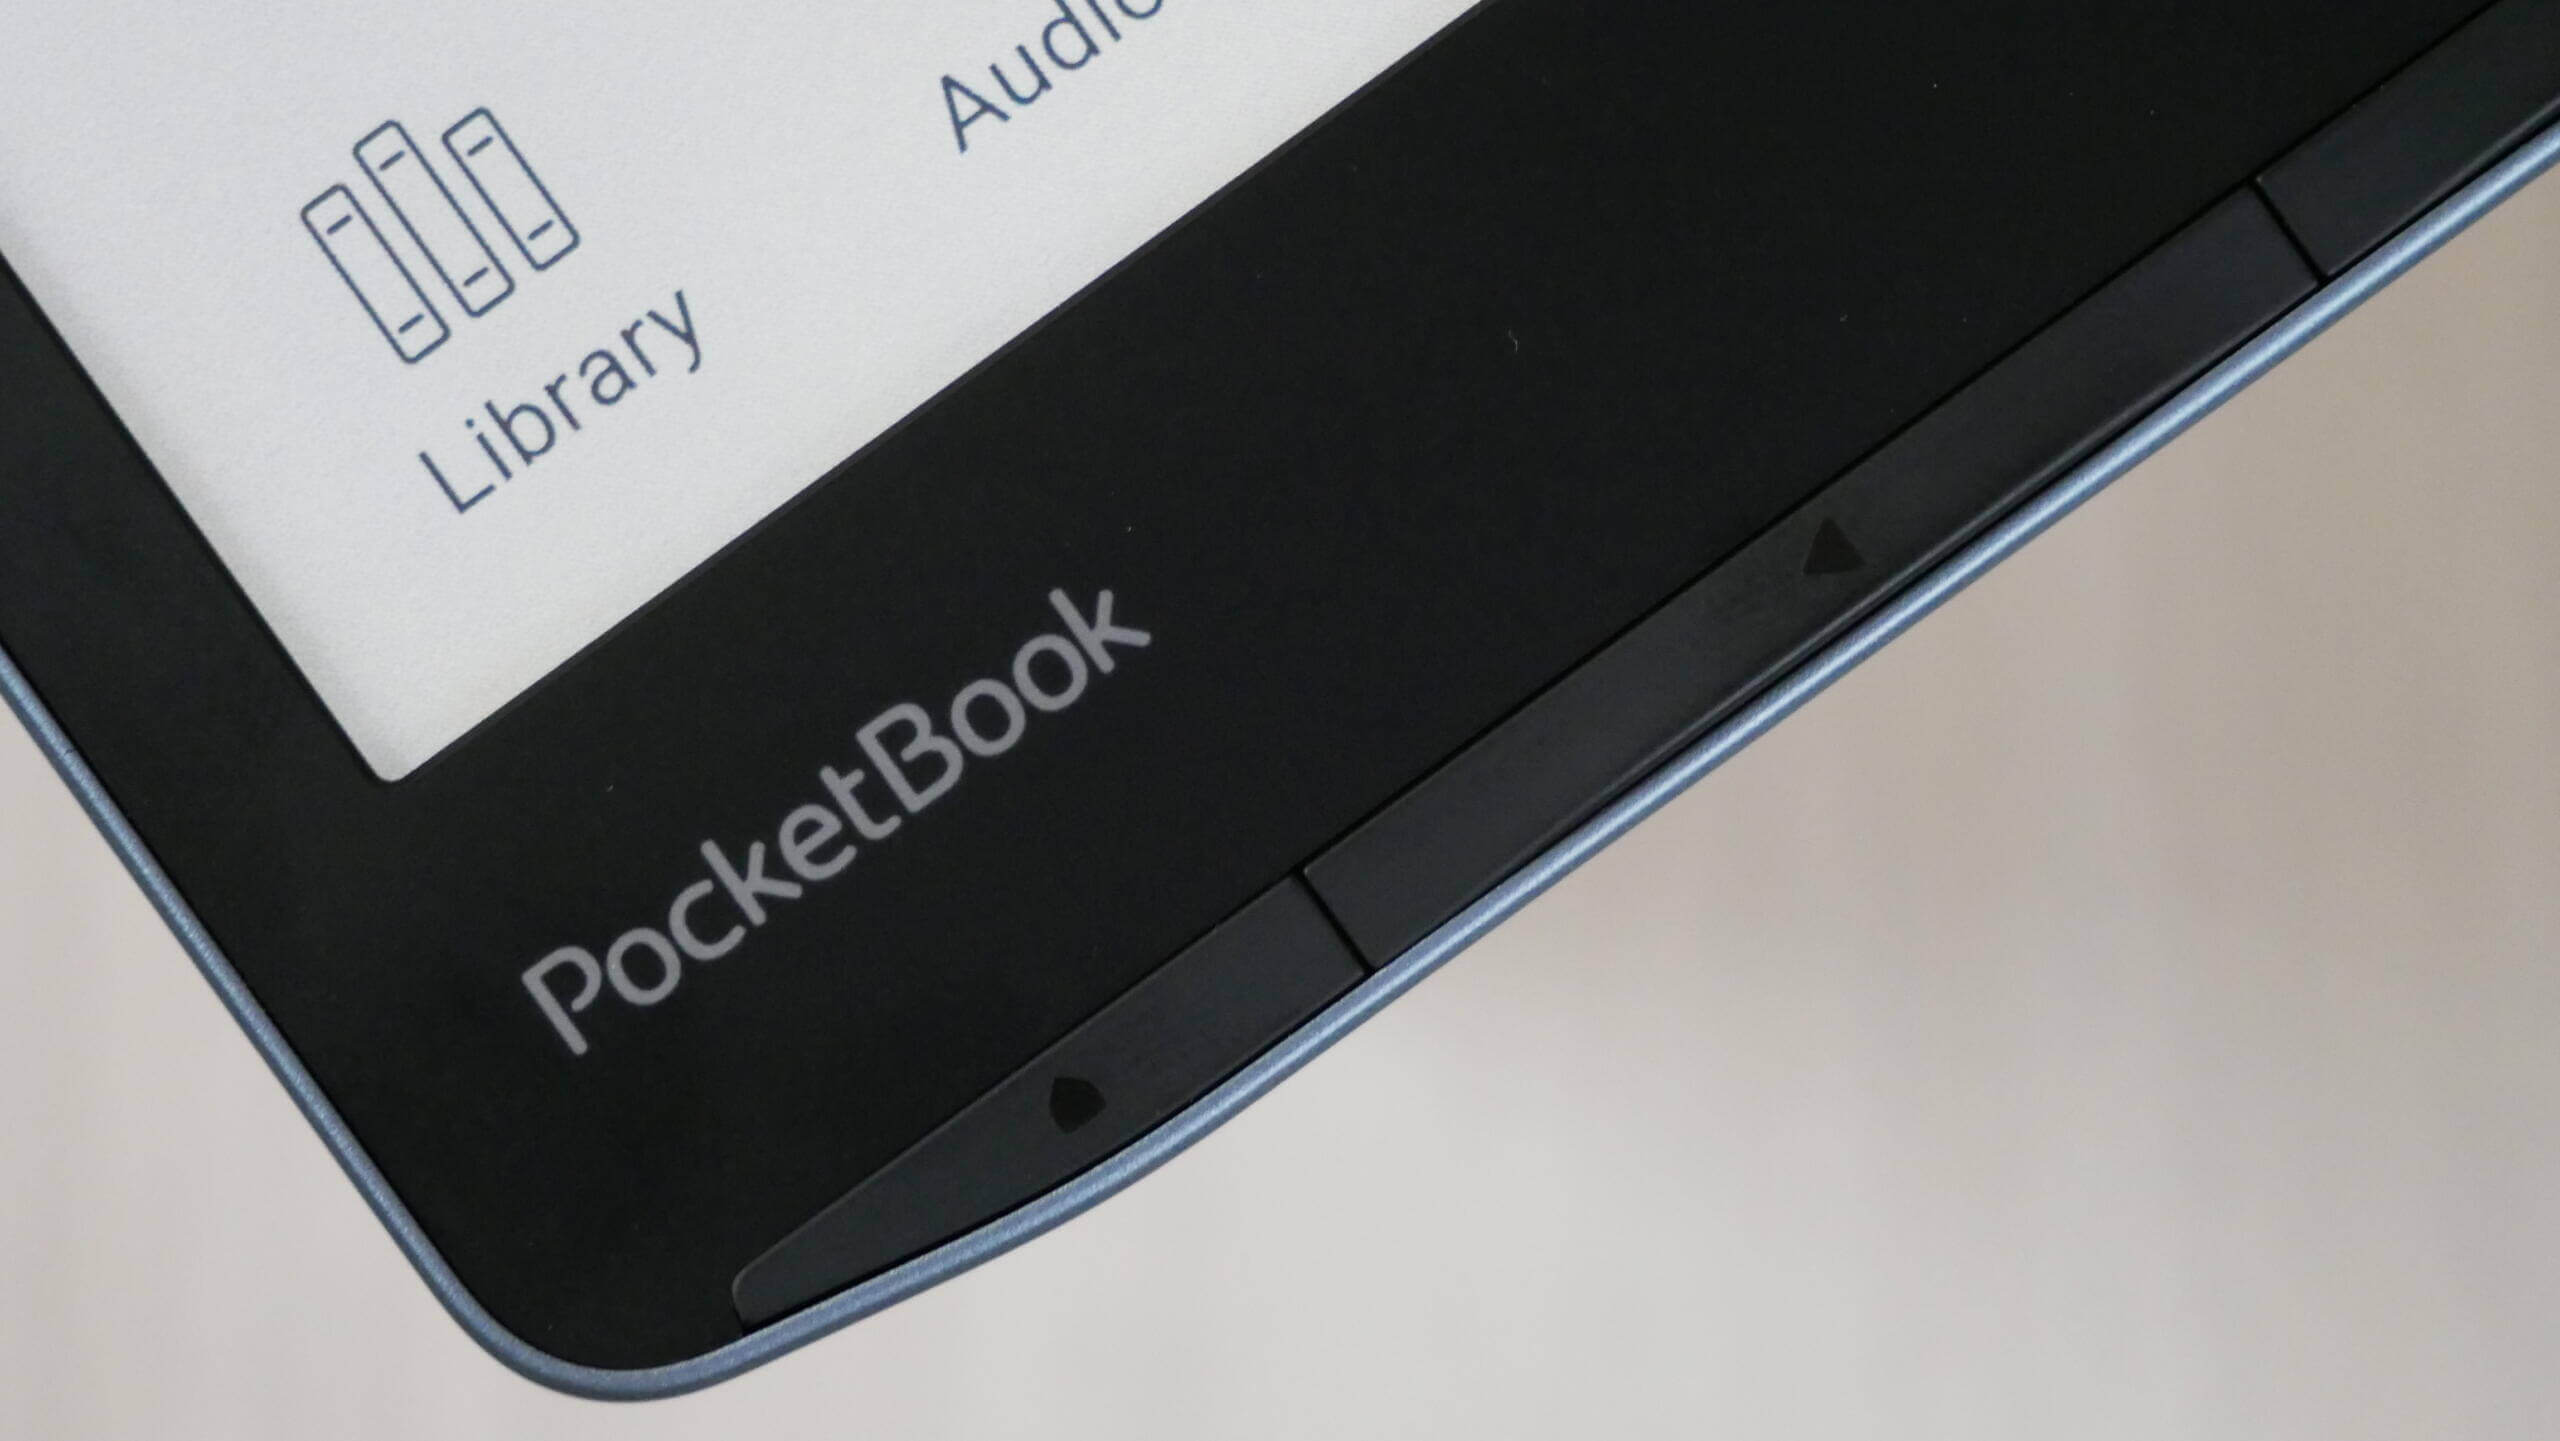 Get the great advantage with the new 7.8-inch PocketBook InkPad 3